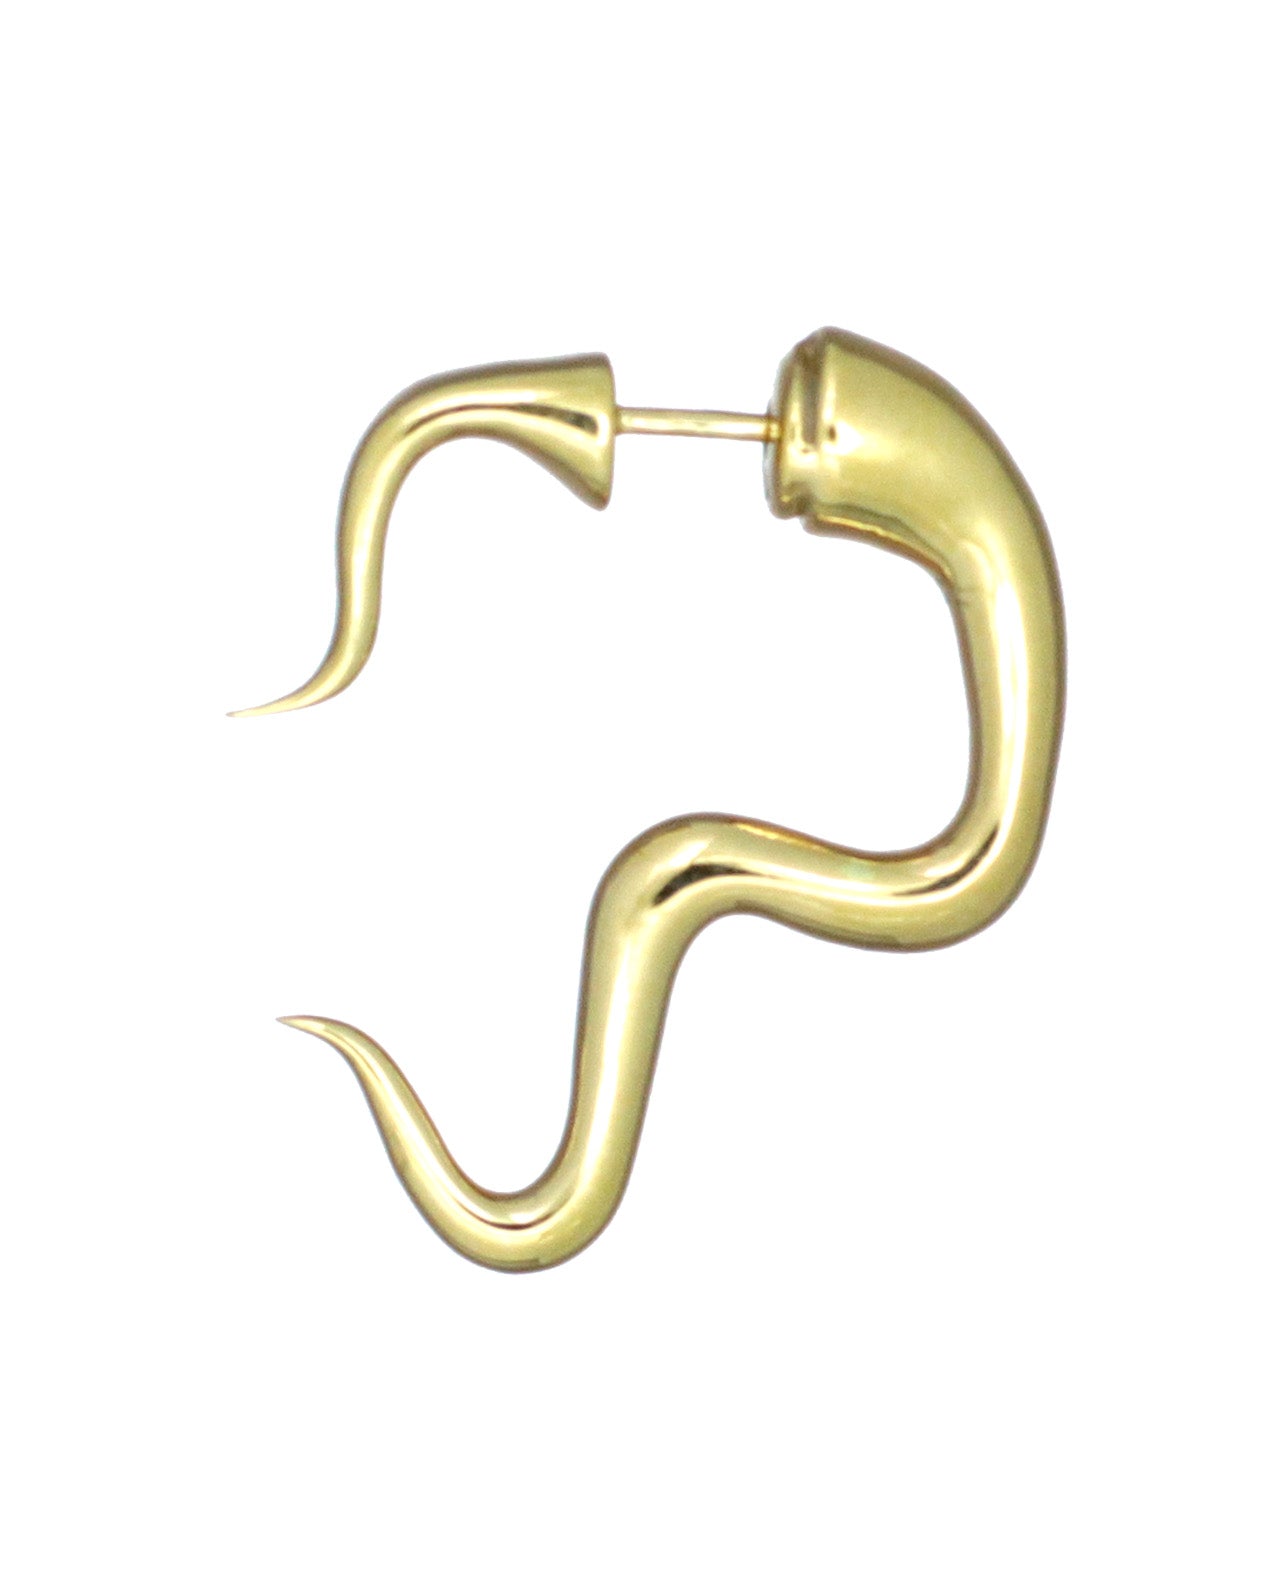 SMOOTH COIL PUSHBACK EARRING